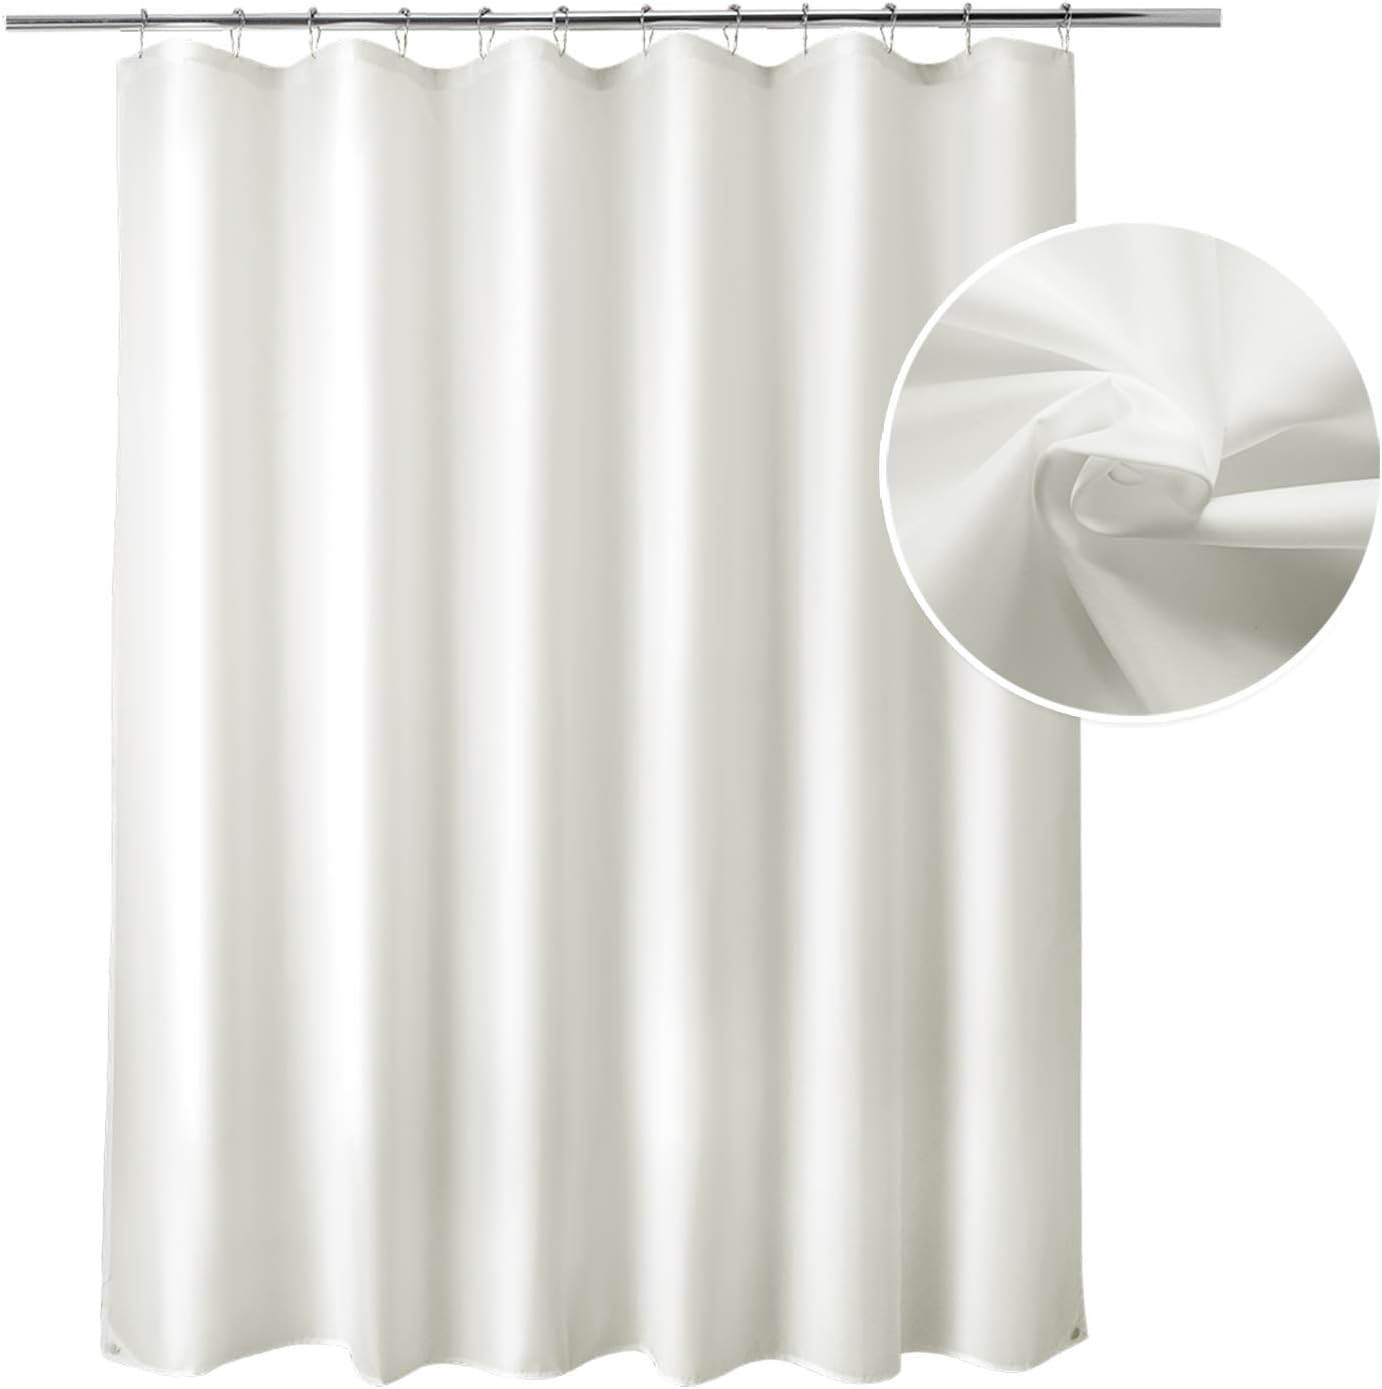 Titanker Shower Curtain Fabric, Do I Need A Liner With Polyester Shower Curtain